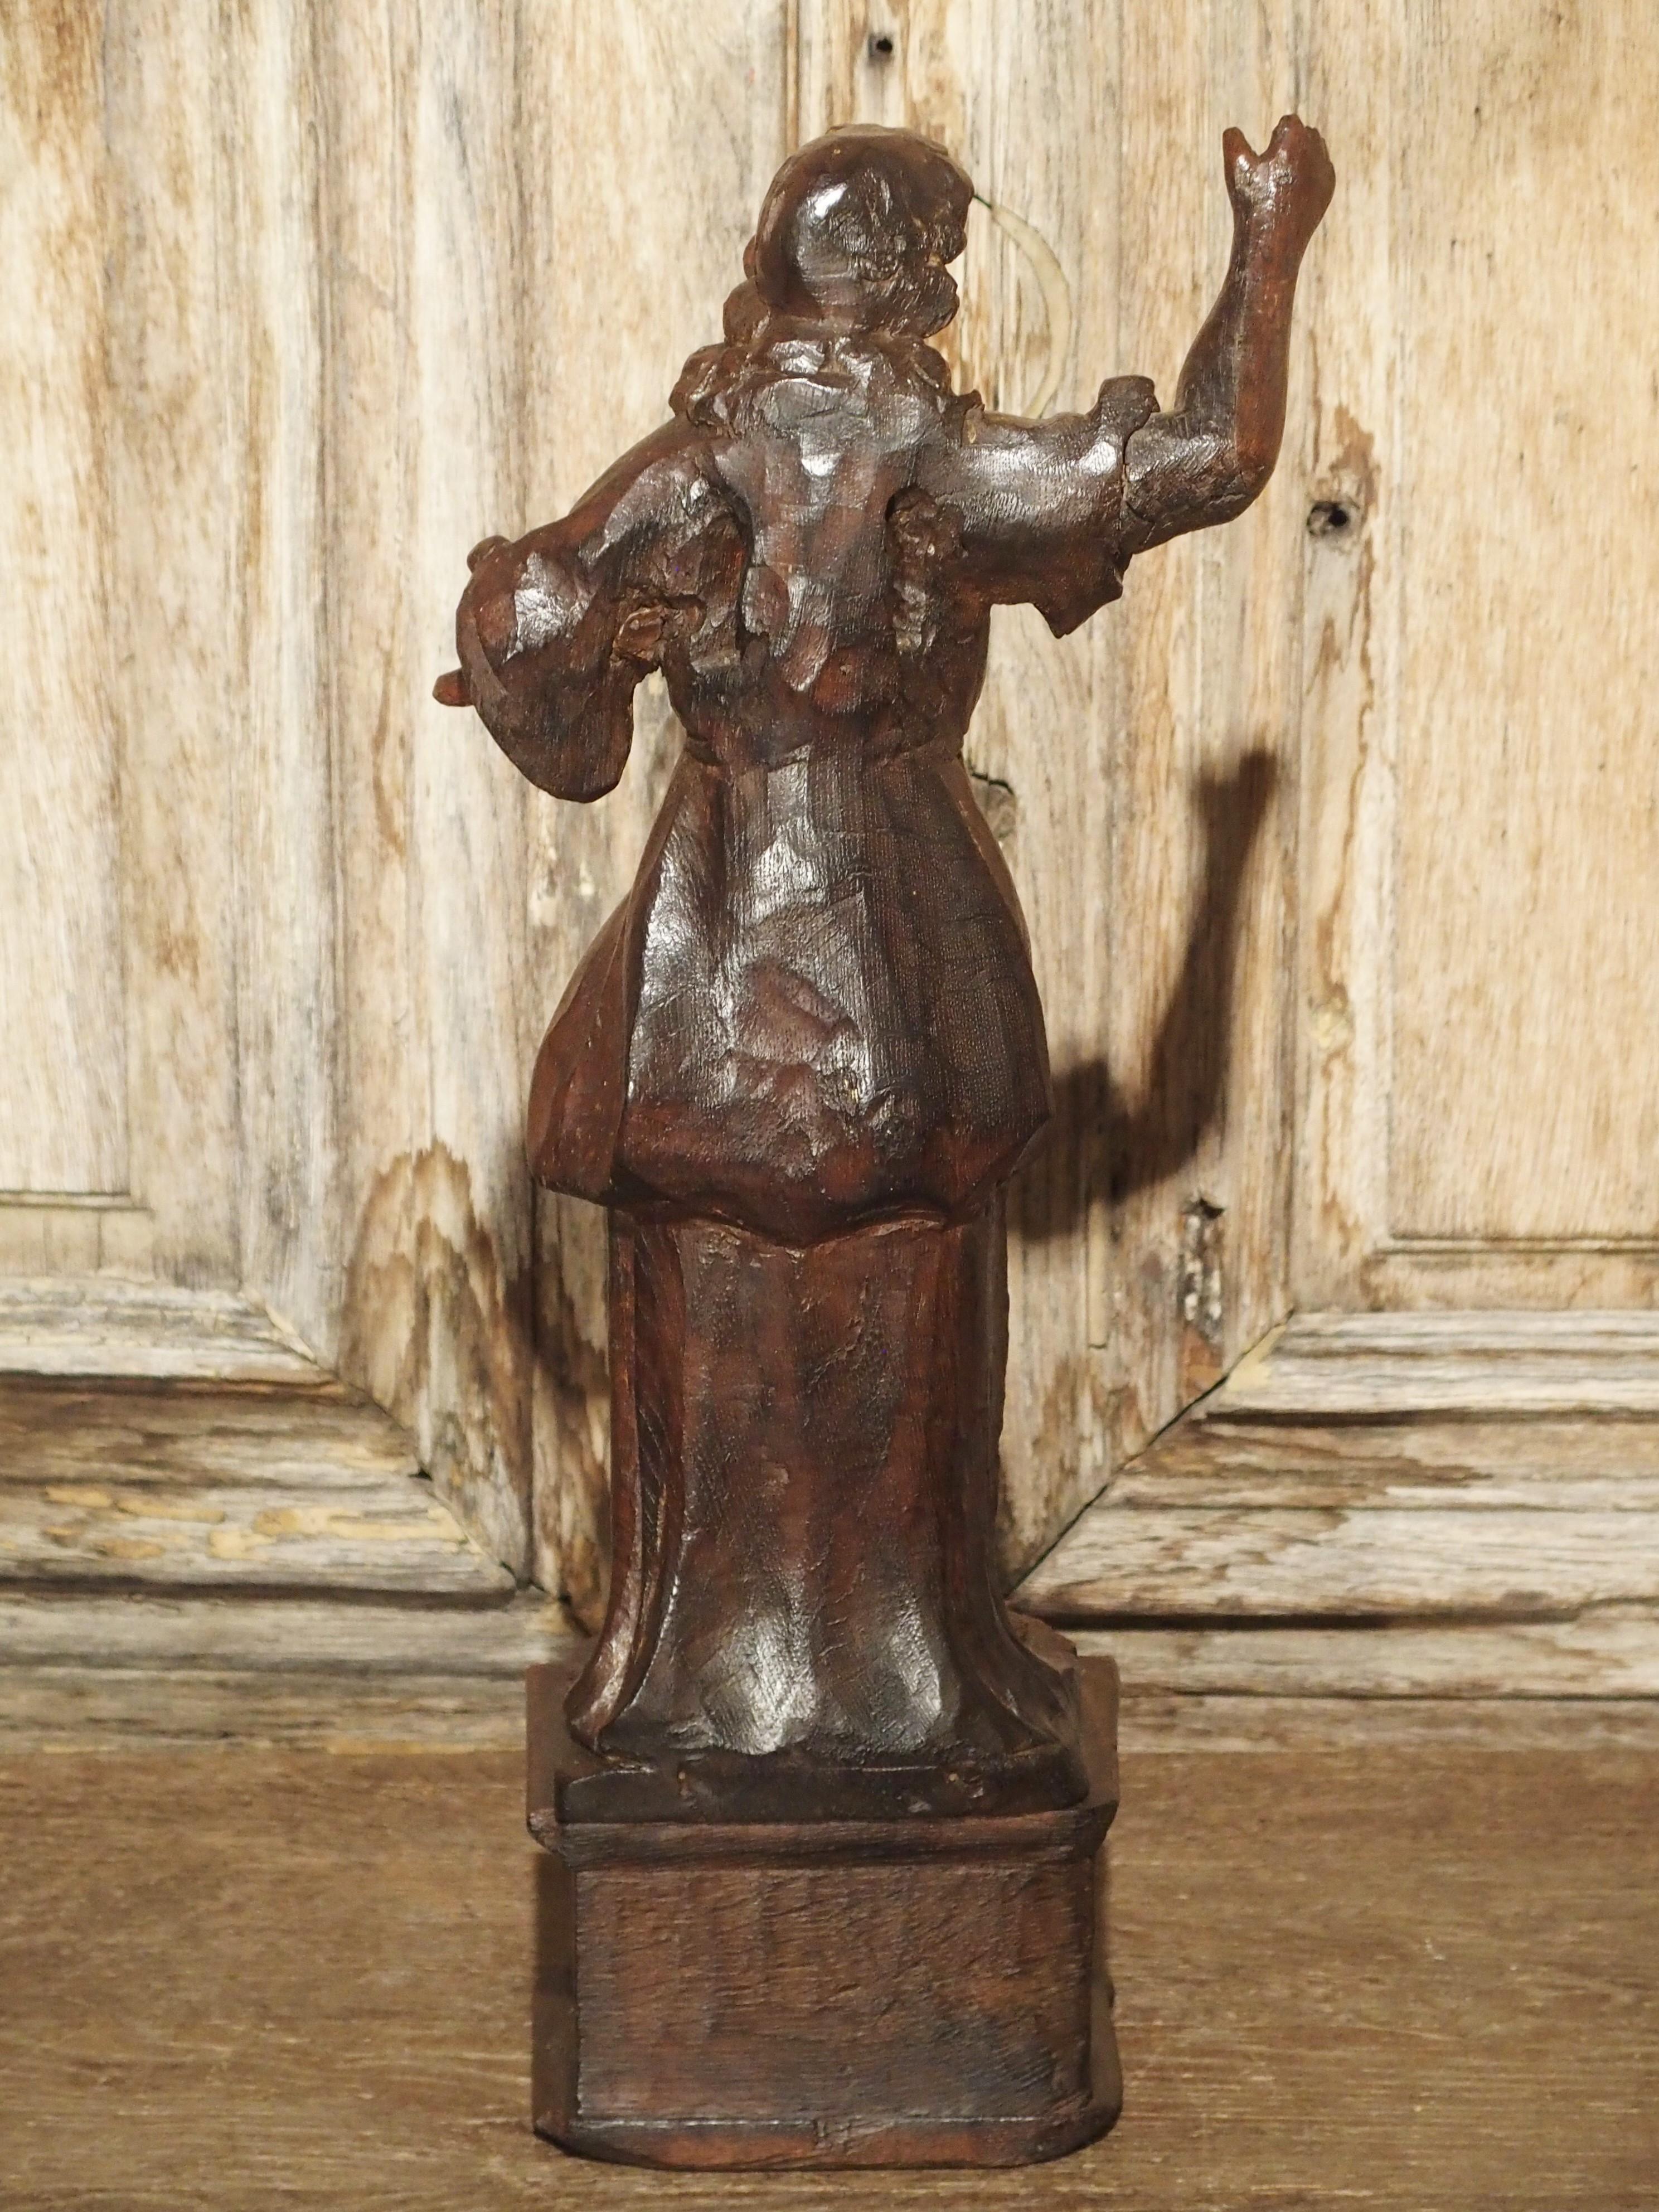 This small French statue from the 1600s depicts a person in a two- piece robe with the bottom right hand portion of the robe attached above the knee. He is standing on a small carved pedestal with carved escutcheon motifs surrounding a date of 1520.